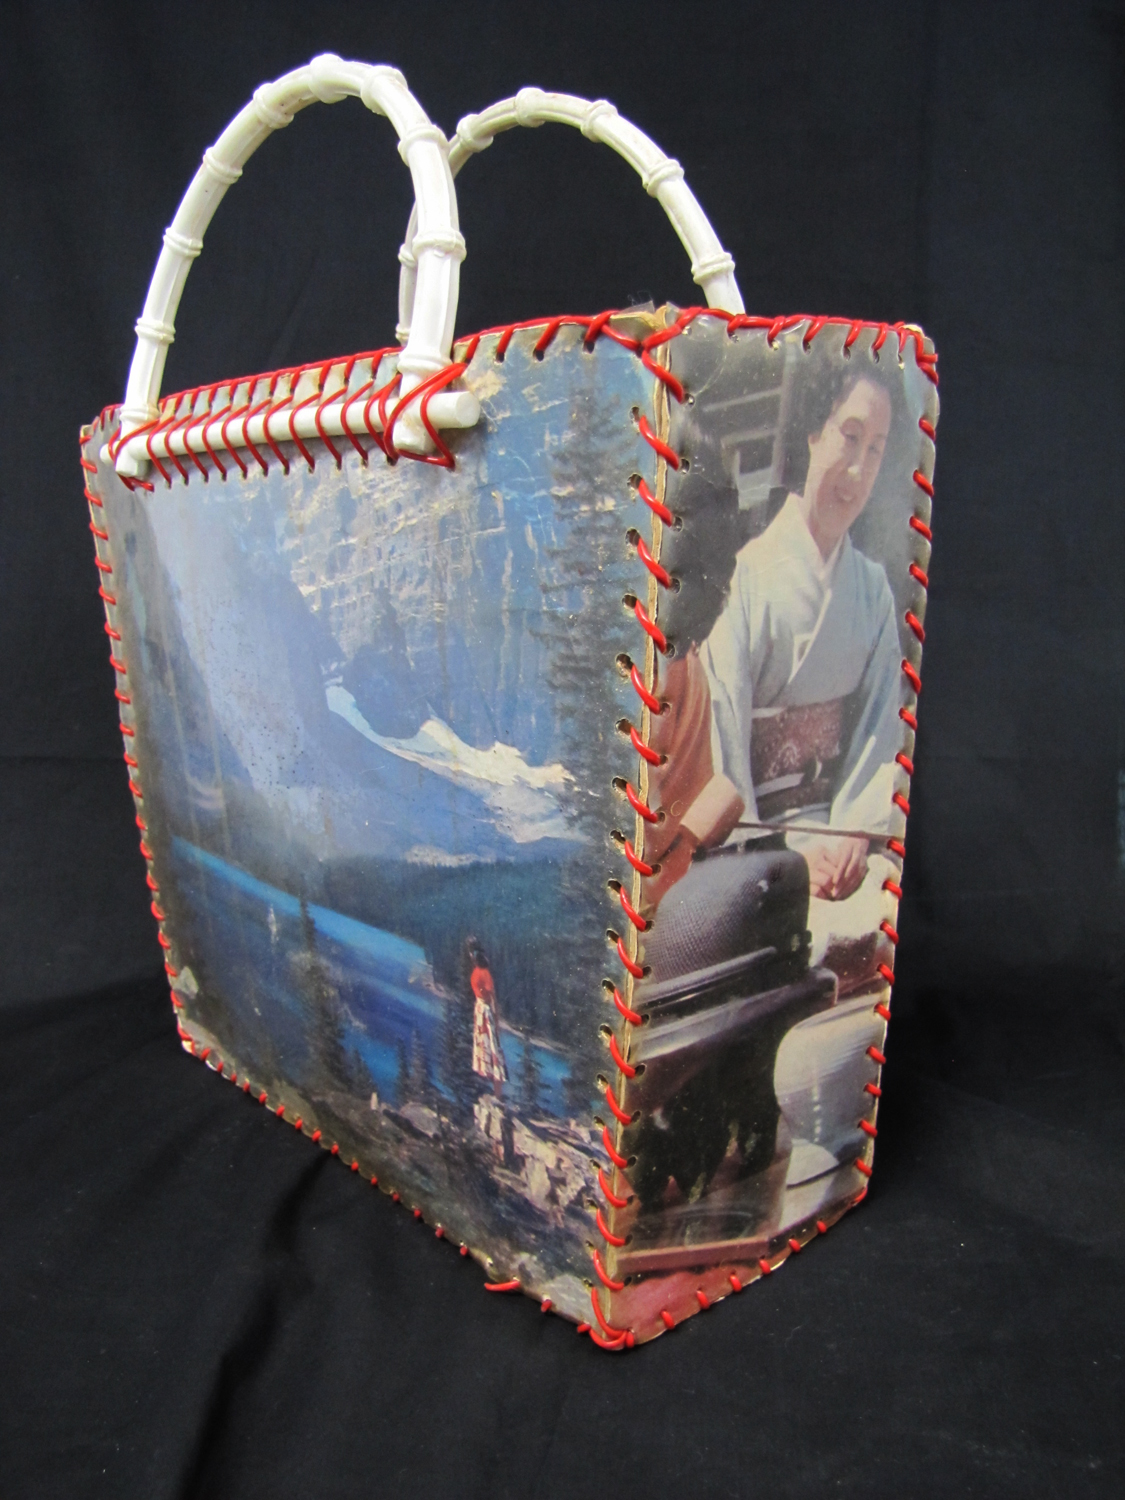 Photographs of shopping bag made from plastic, pictures and plastic